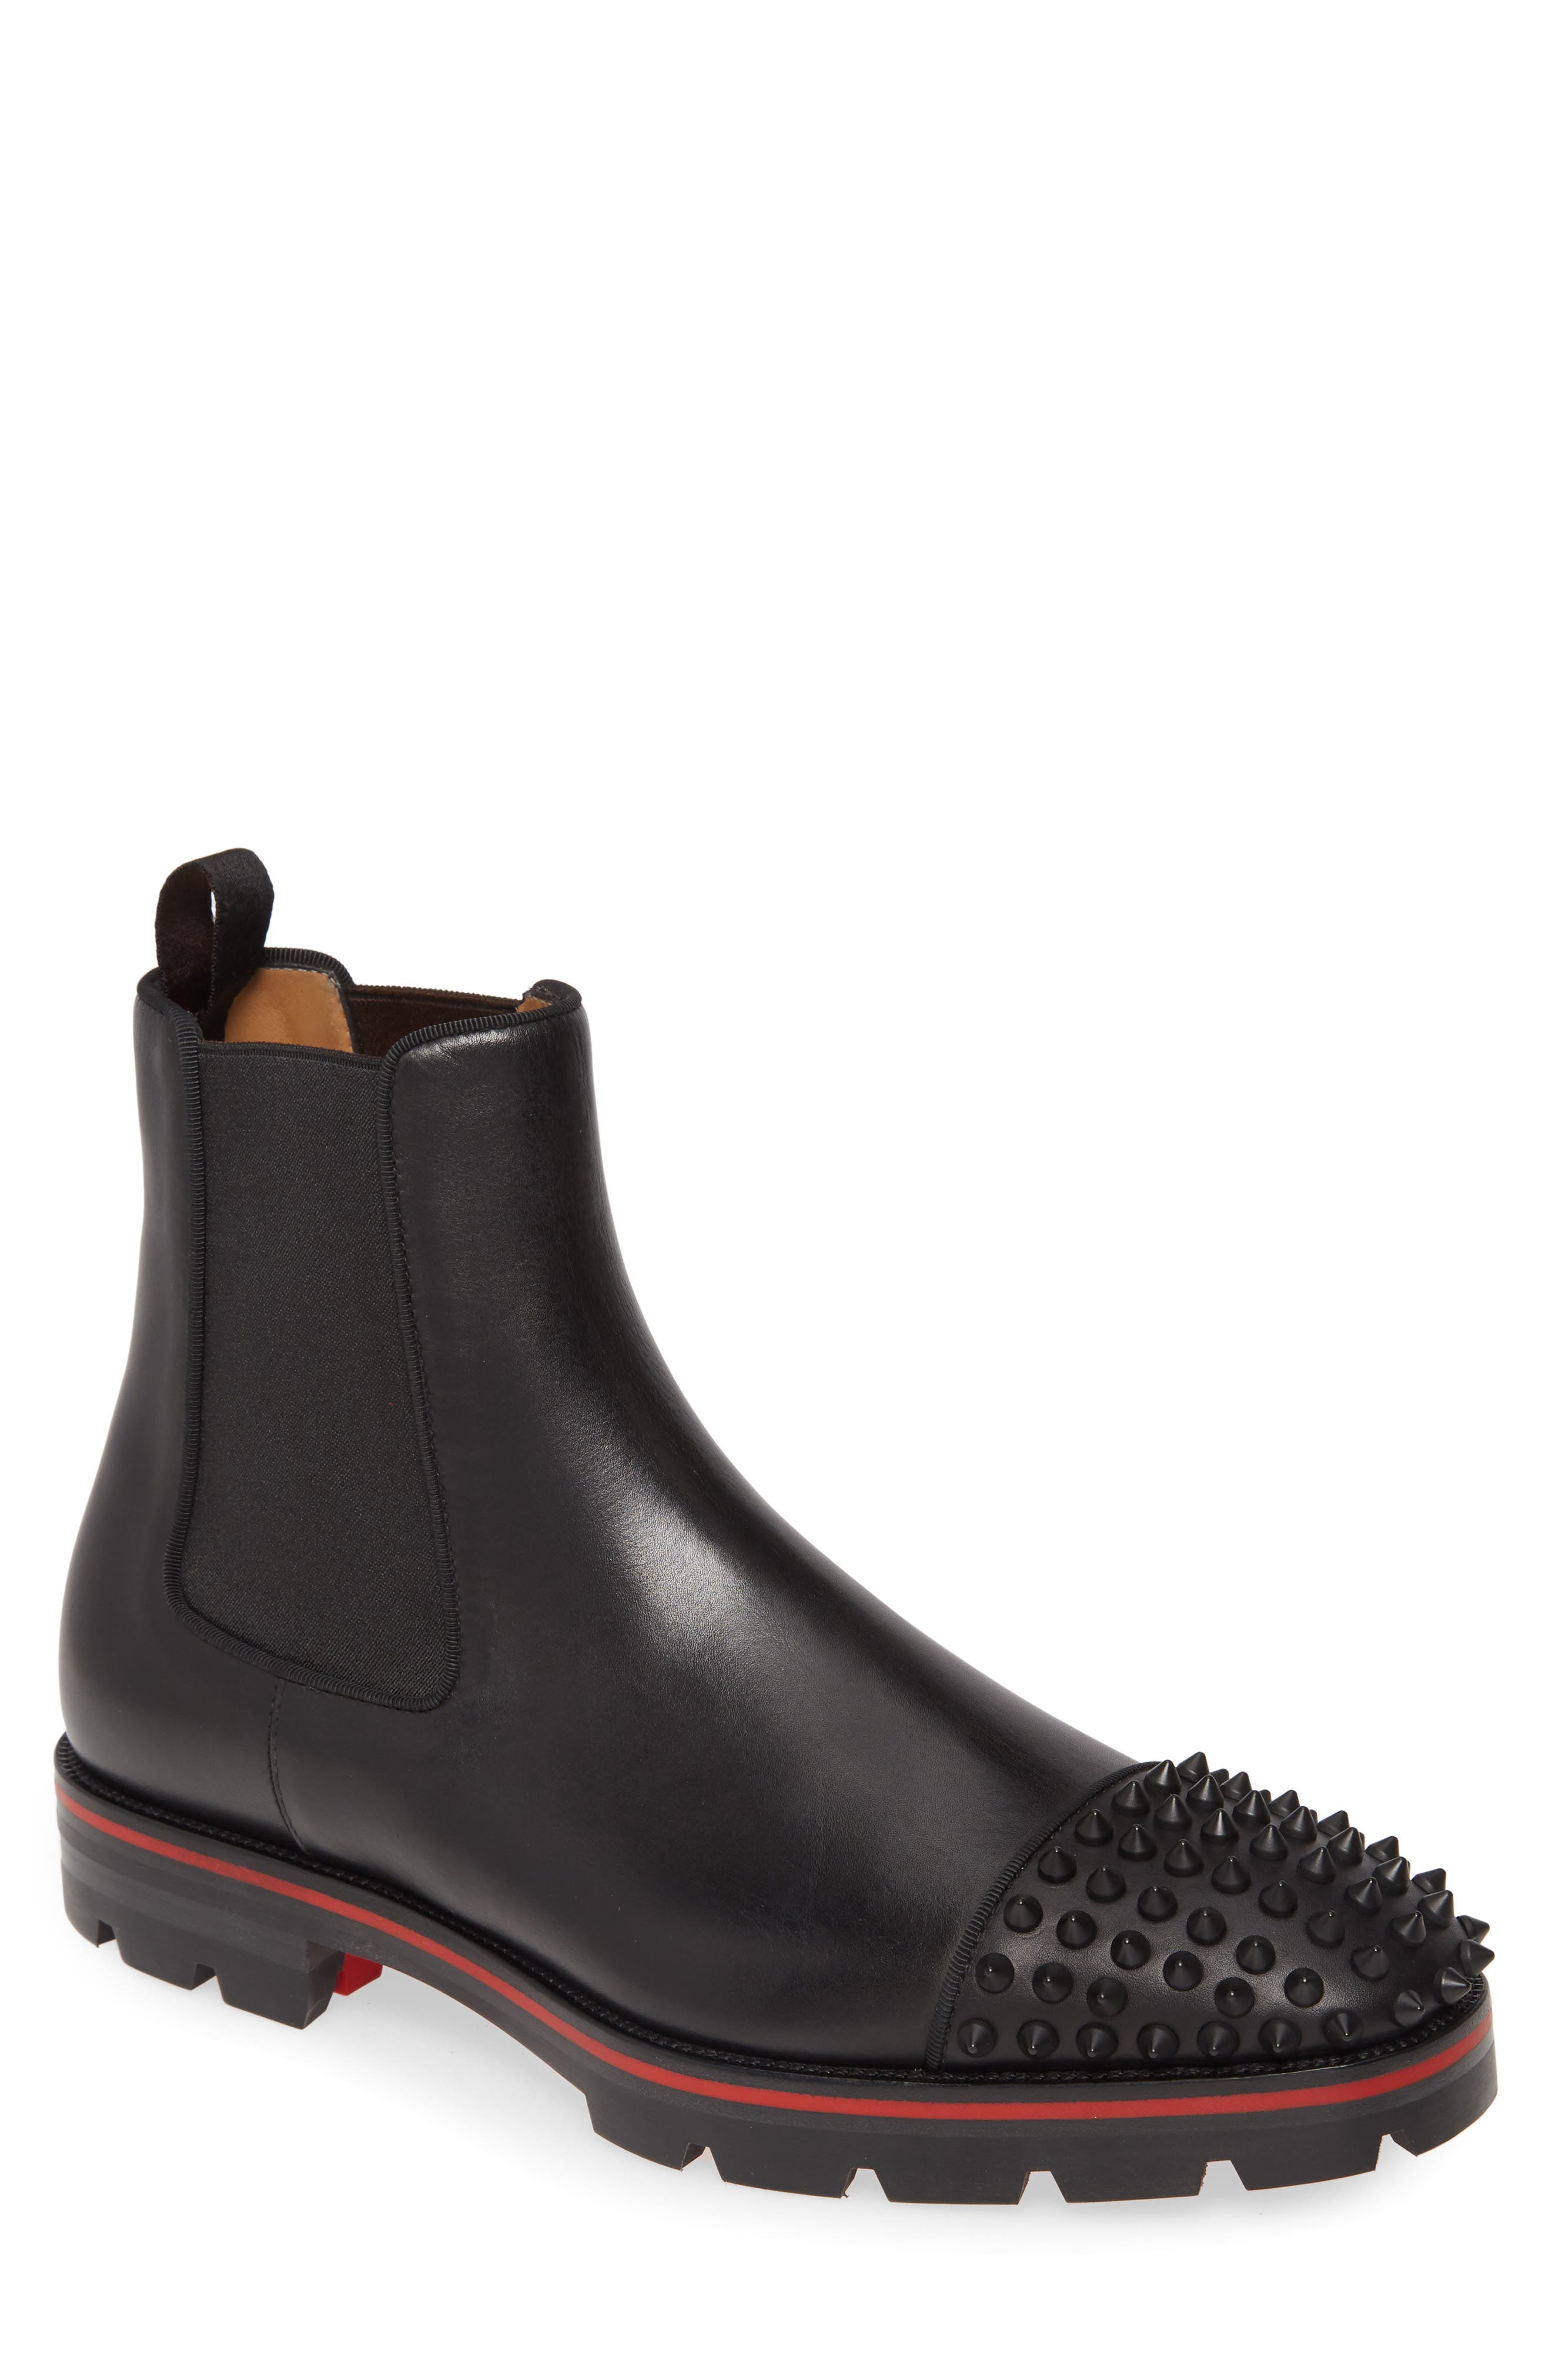 louboutin boots spikes